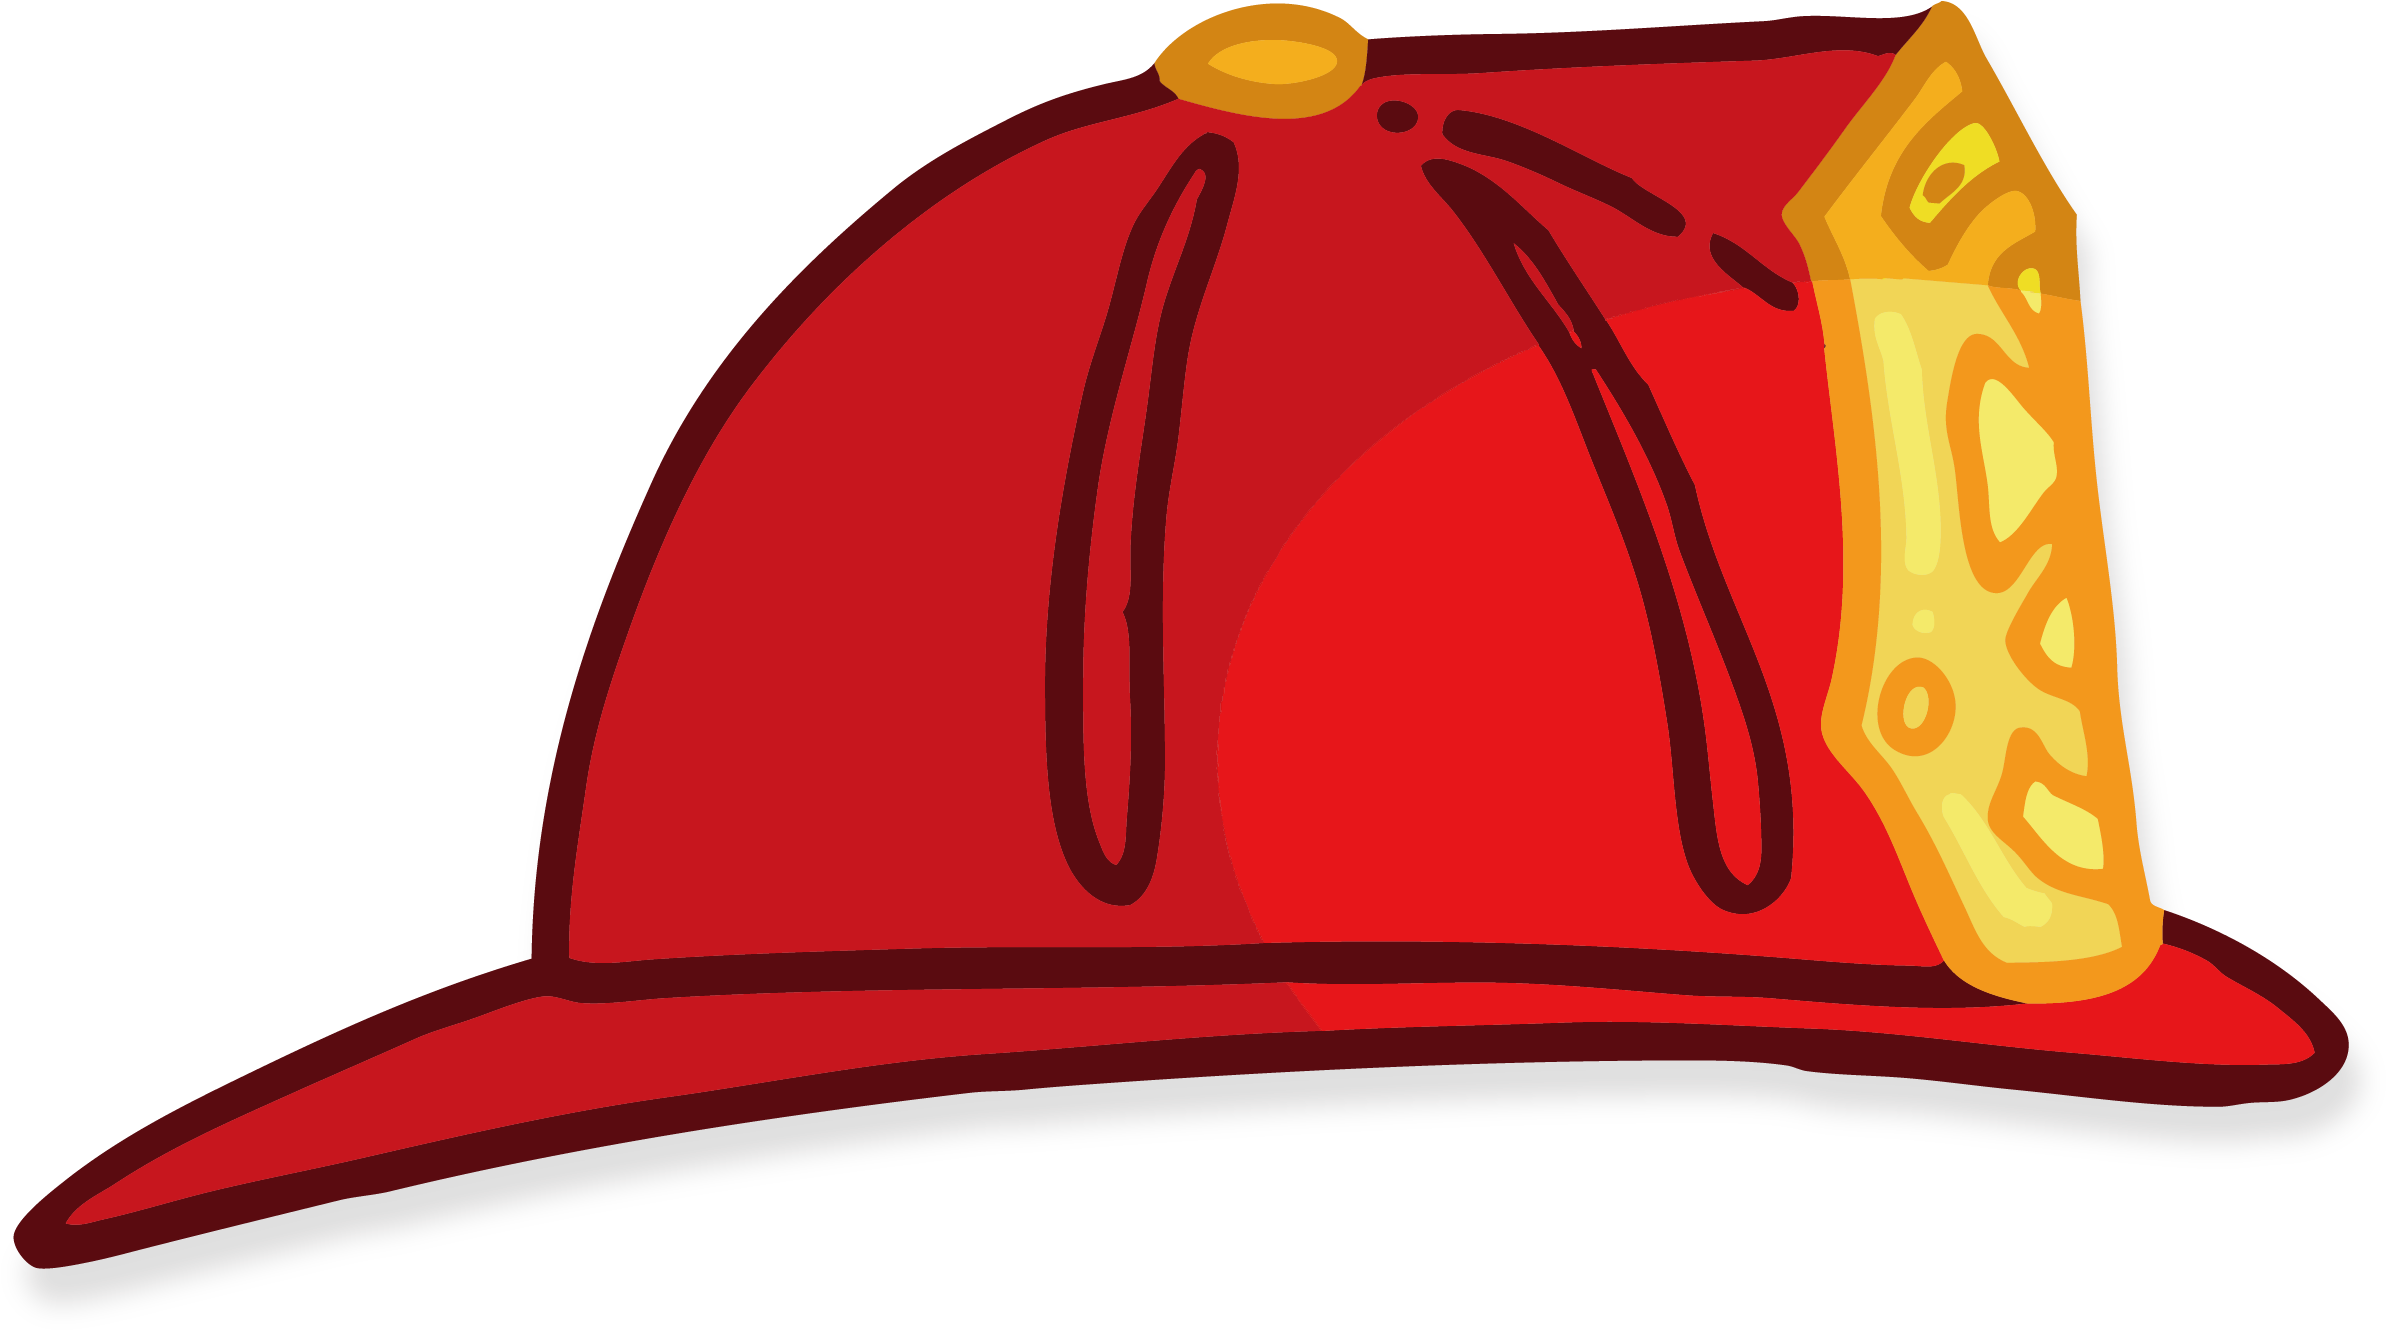 A Red Hat With A Yellow Center